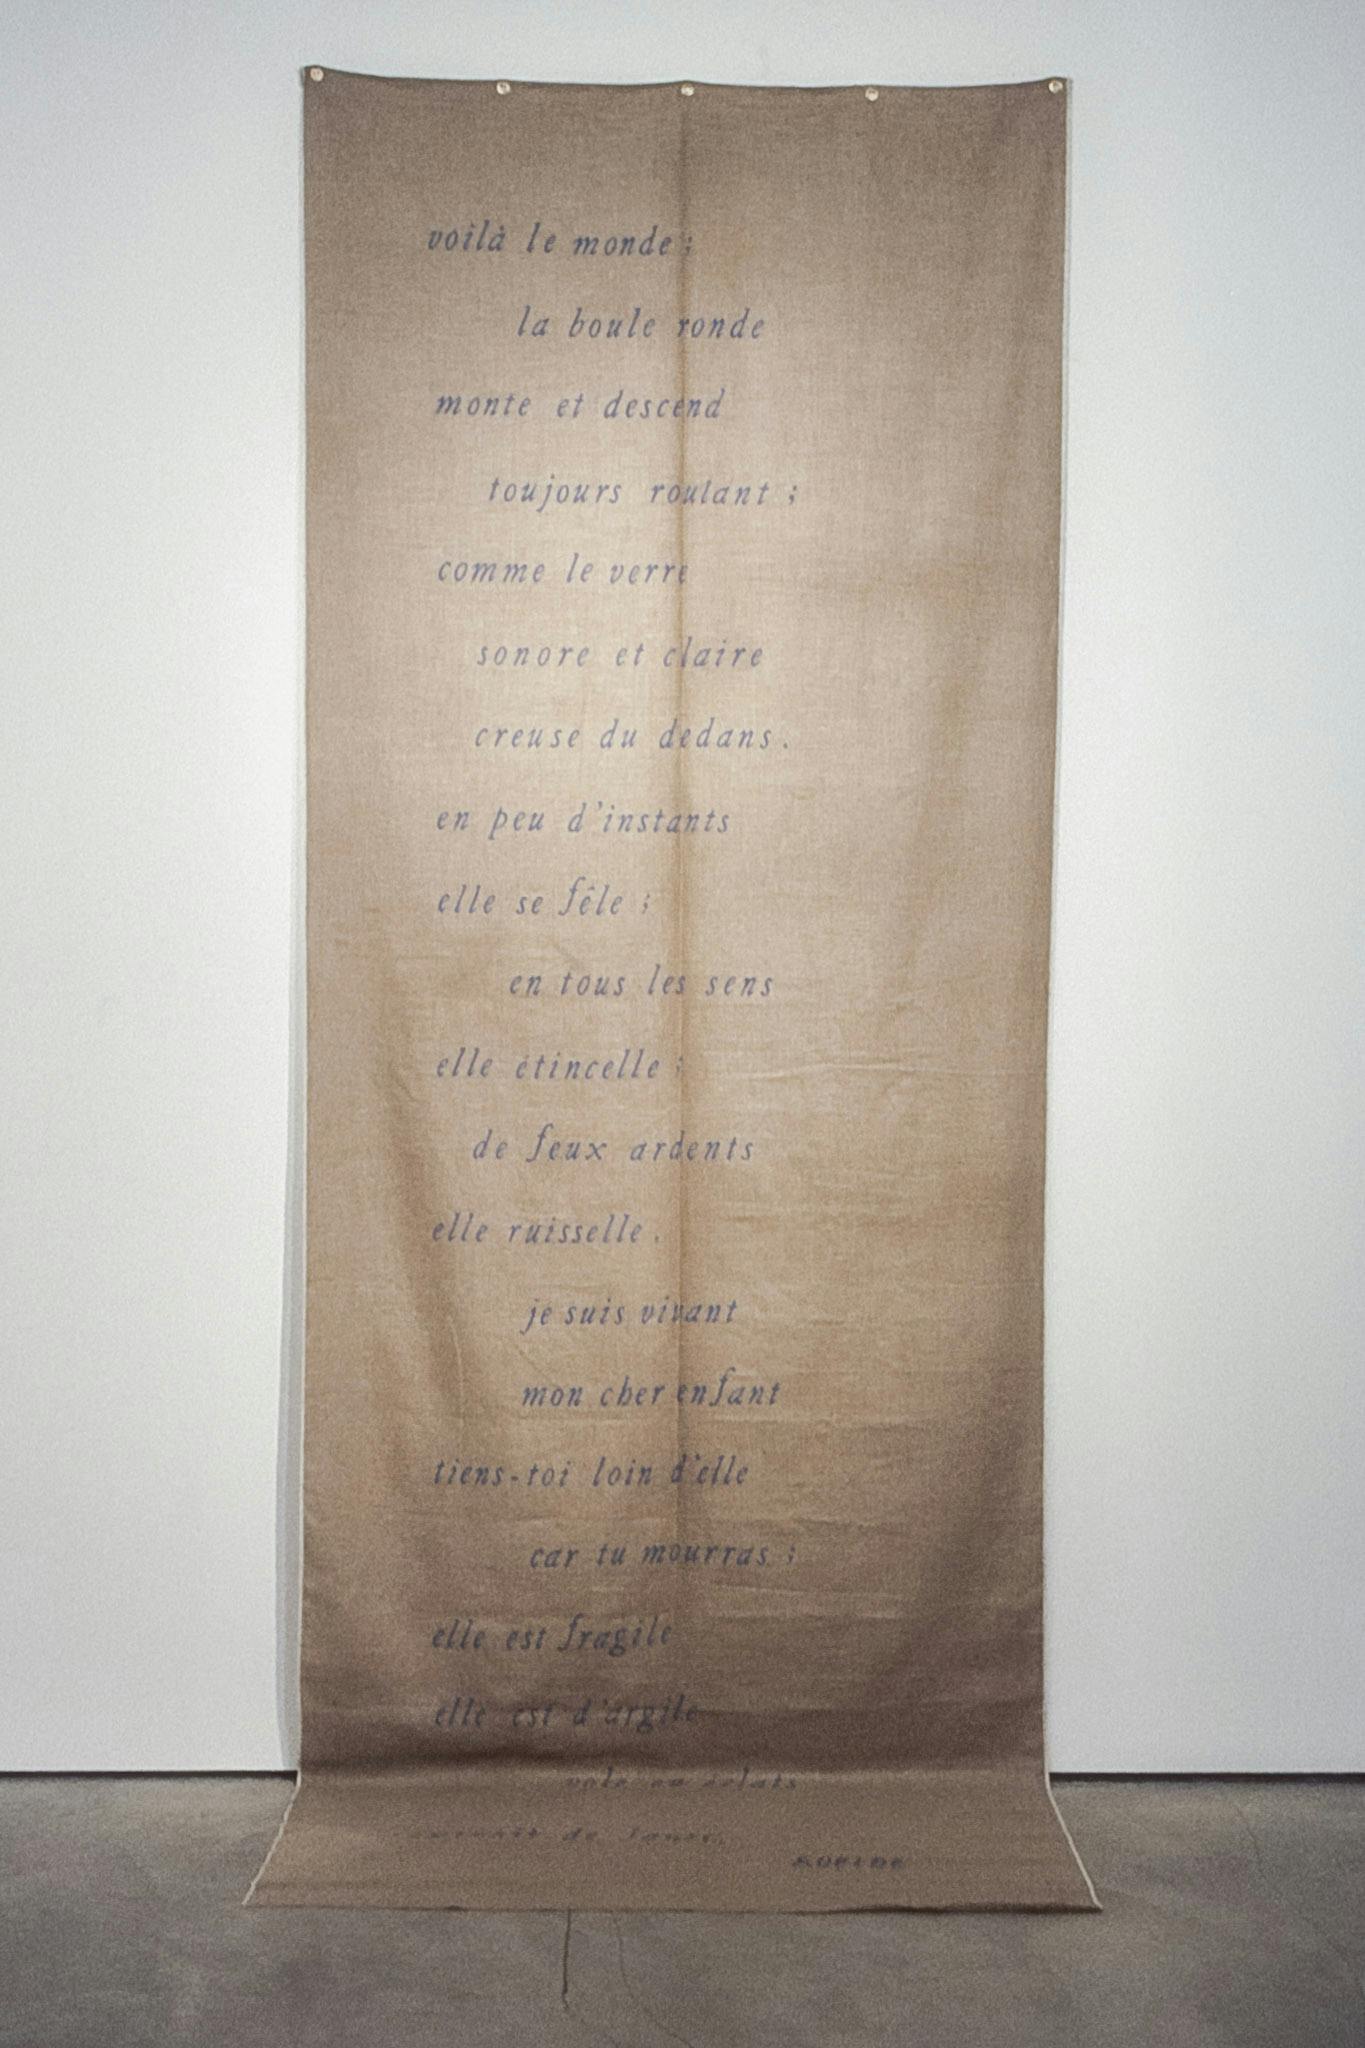 Mounted on a white wall, a long piece of brown fabric drapes to the floor. The fabric has 22 french phrases on it in italicized, purple lowercase text. The first phrase reads: "voilà le monde."